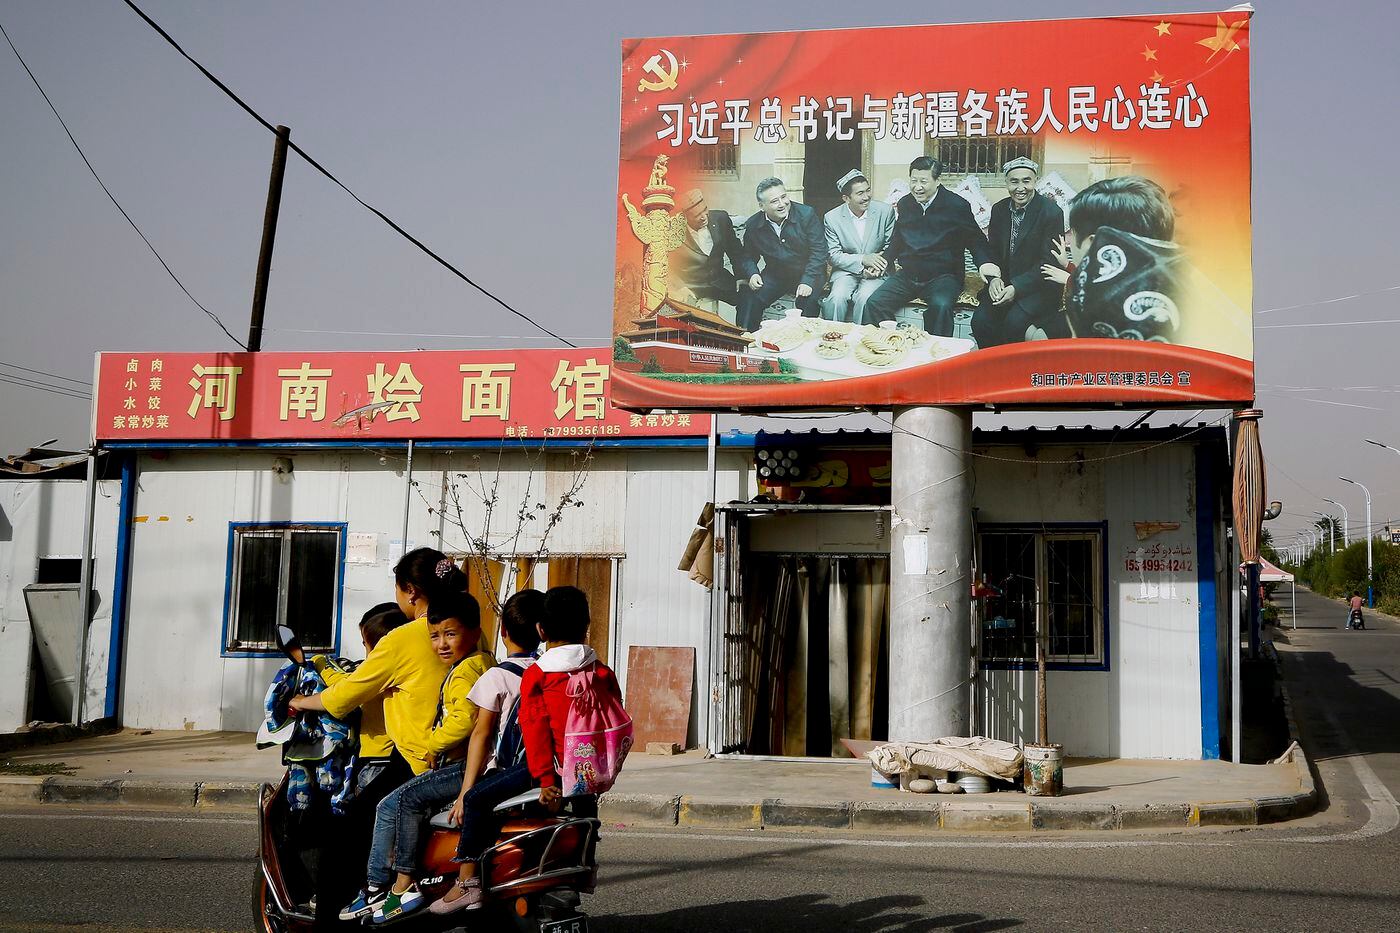 In this Sept. 20, 2018, photo, an Uighur woman uses an electric-powered scooter to fetch schoolchildren as they ride past a picture showing China's President Xi Jinping joining hands with a group of Uighur elders at the Unity New Village in Hotan, in western China's Xinjiang region. 